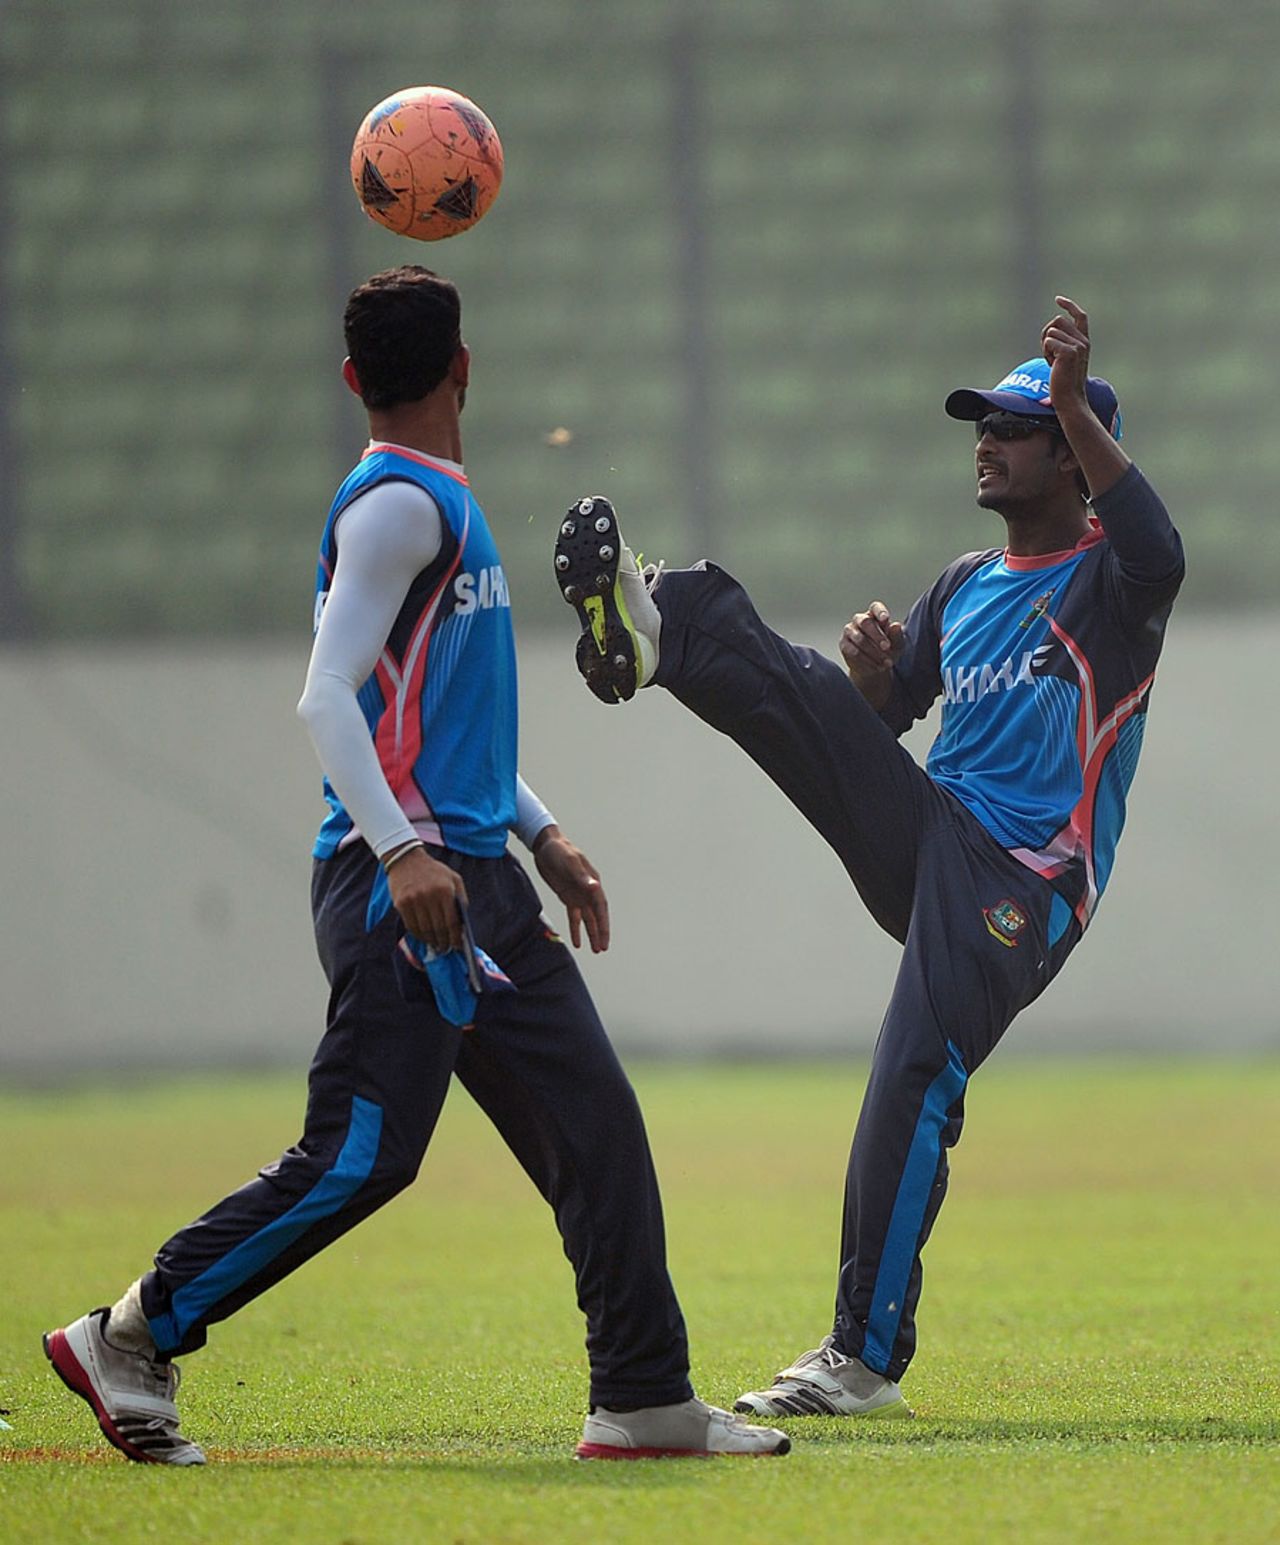 Naeem Islam (right) and Nasir Hossain warm up with a game of football, Dhaka, November 2, 2013